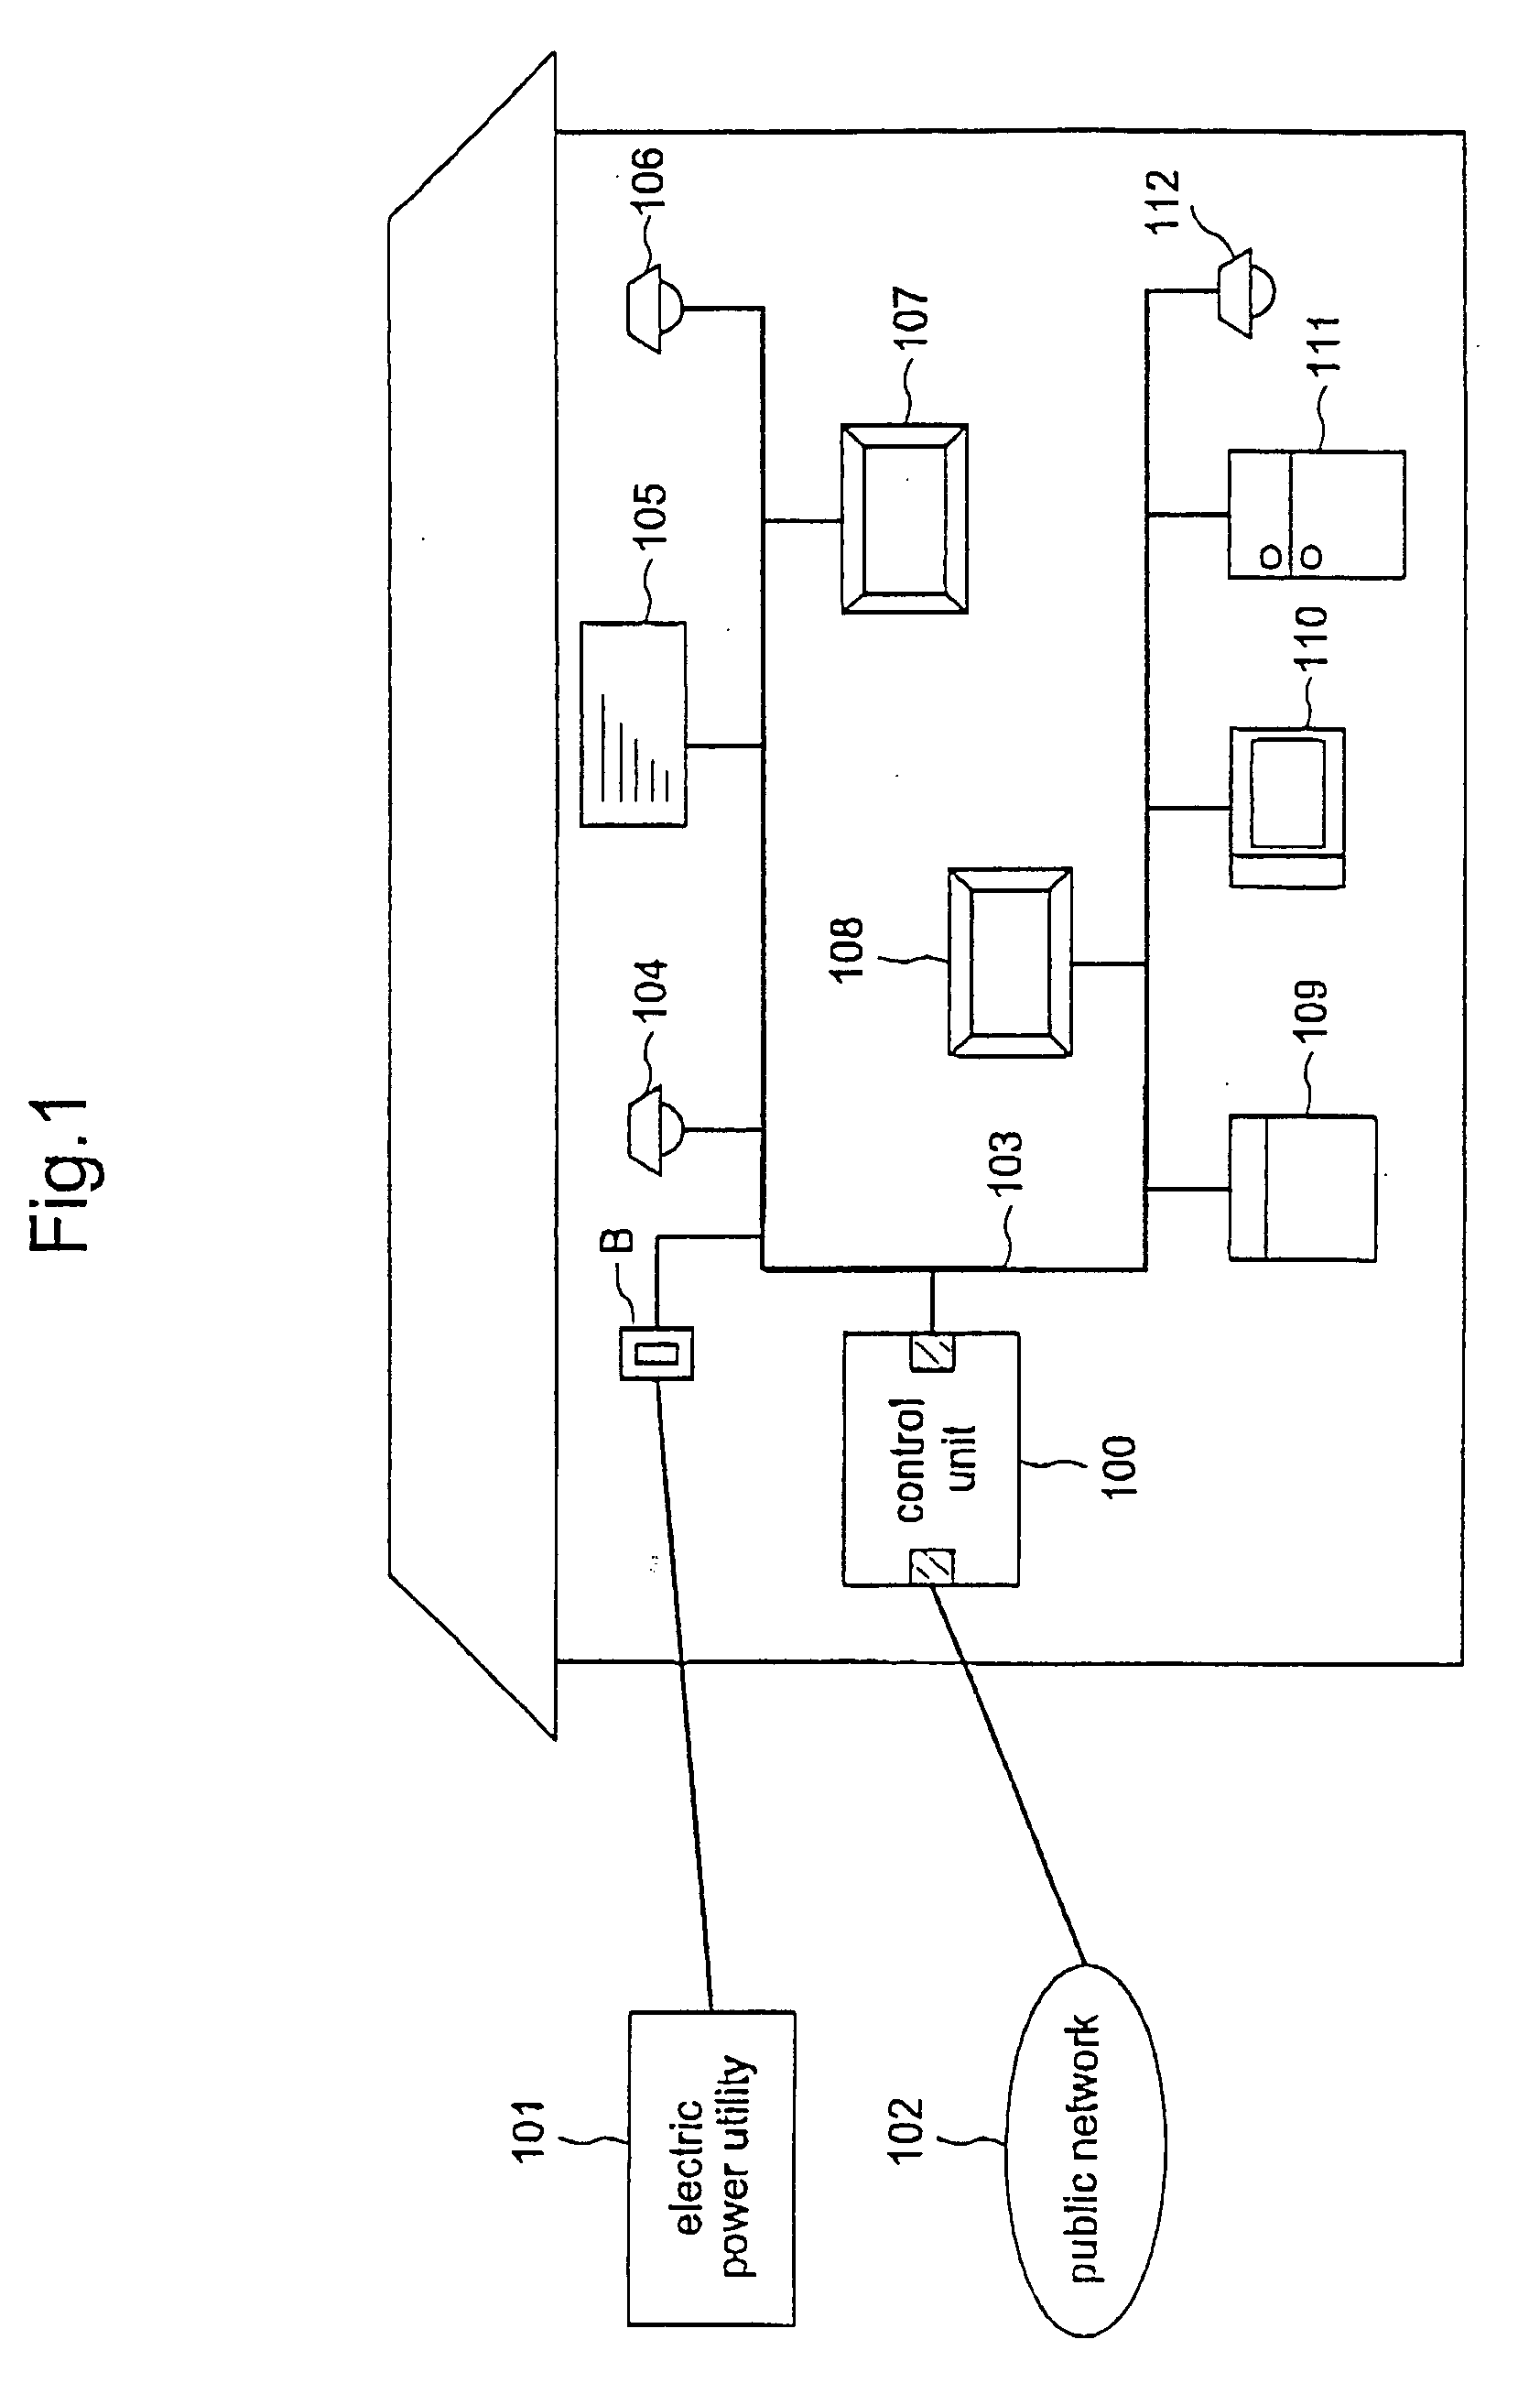 Control apparatus and control method for managing communications between multiple electrical appliances through a household power line network